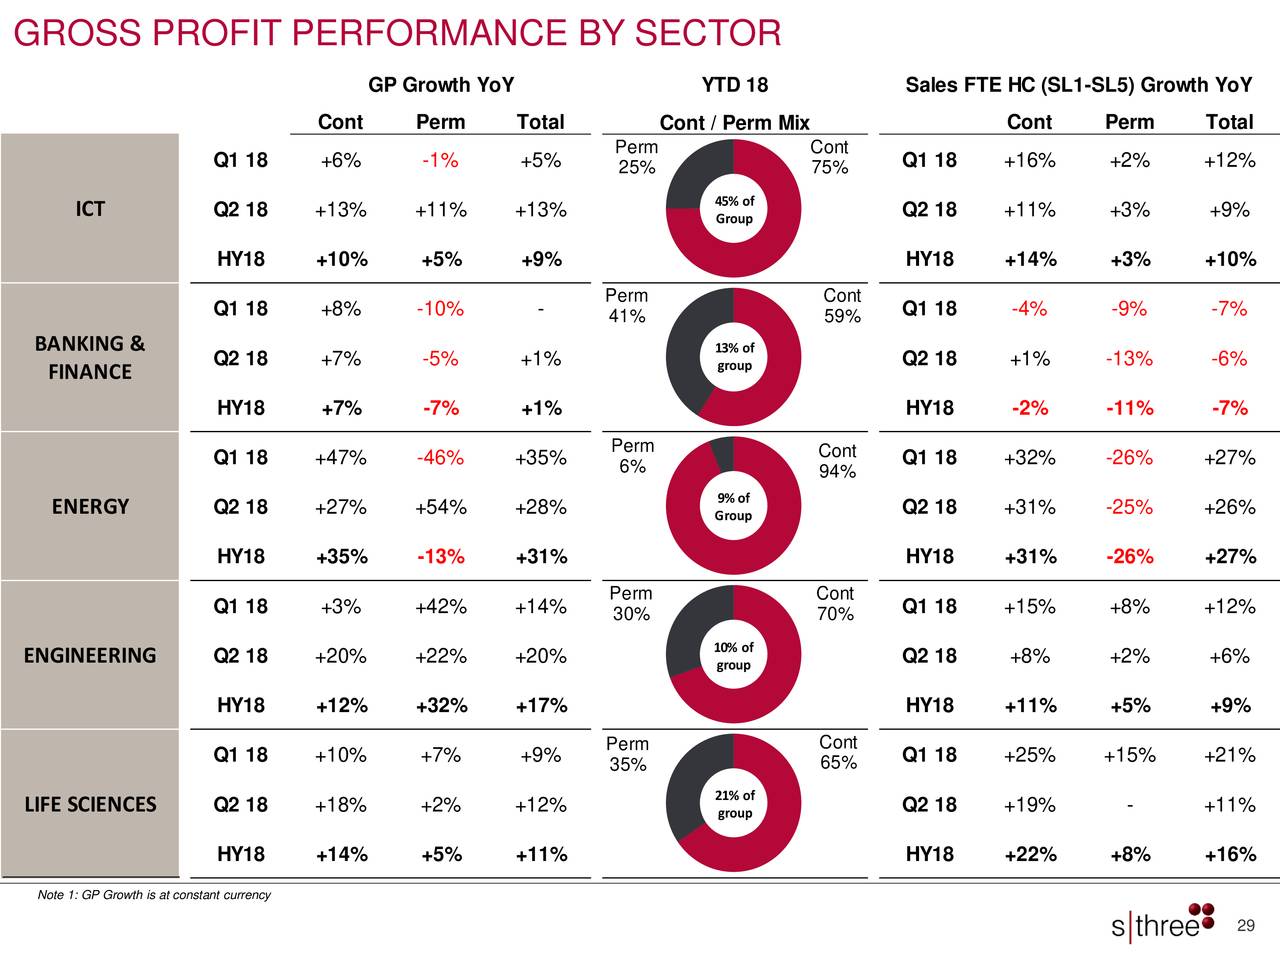 GROSS PROFIT PERFORMANCE BY SECTOR